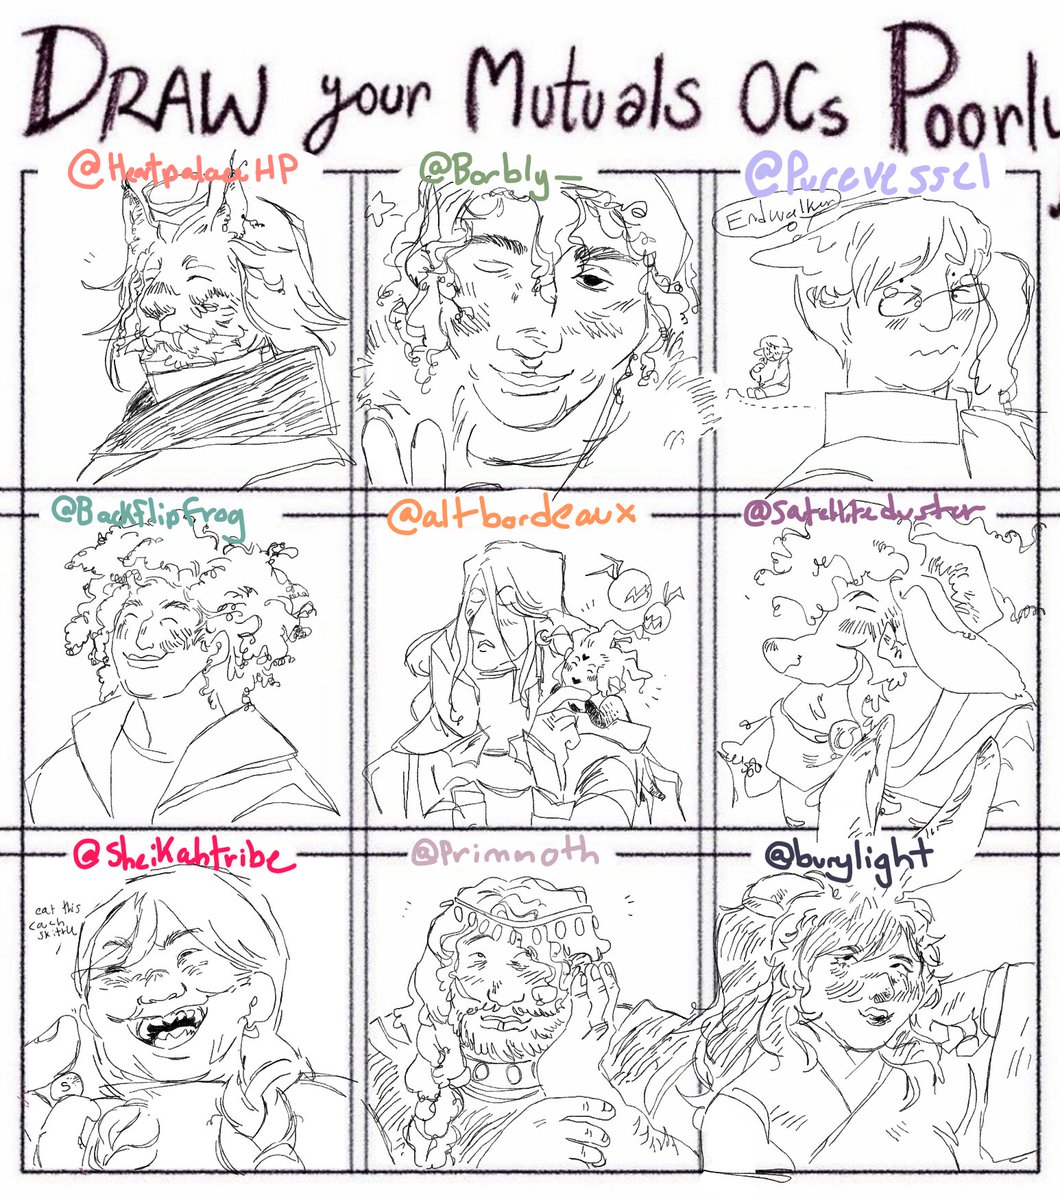 ack ack might color these in later because it was fun but thank you mutuals for letting me draw yer ocs hope you enjoy seeing that i draw with my head turned sideways auahcha 